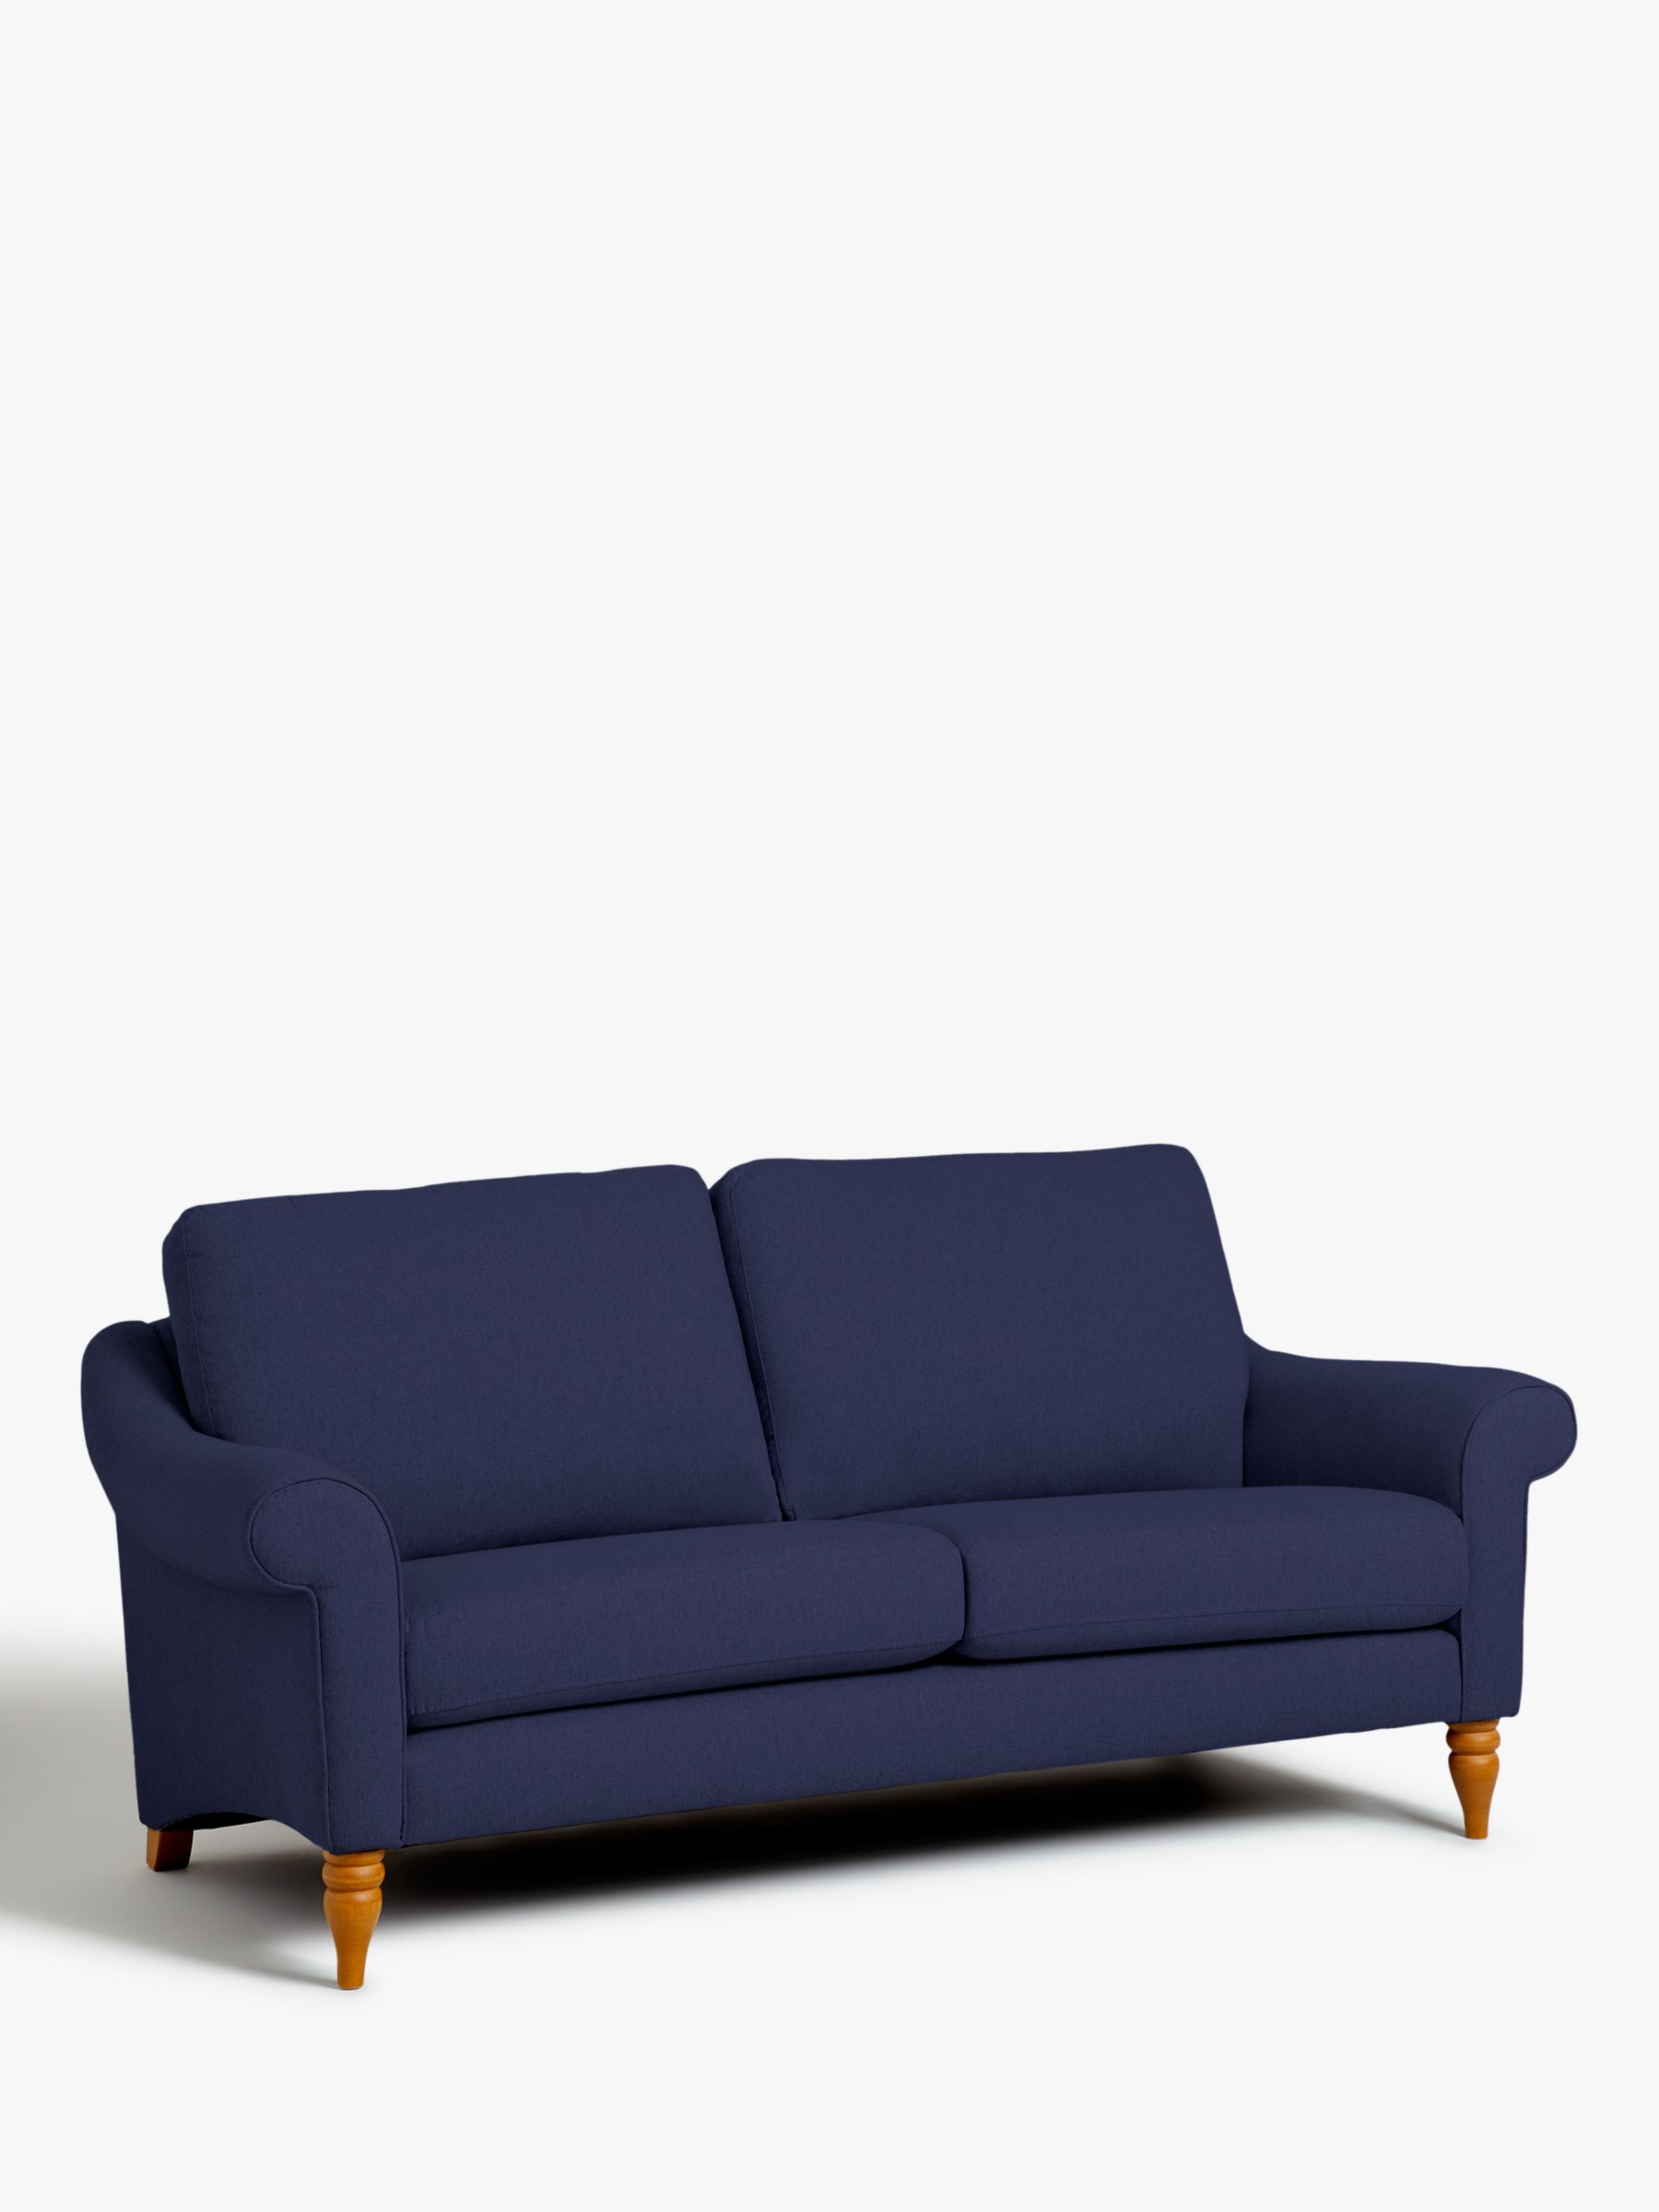 Camber Range, John Lewis Camber Large 3 Seater Sofa, Light Leg, Easy Clean Recycled Brushed Cotton Navy